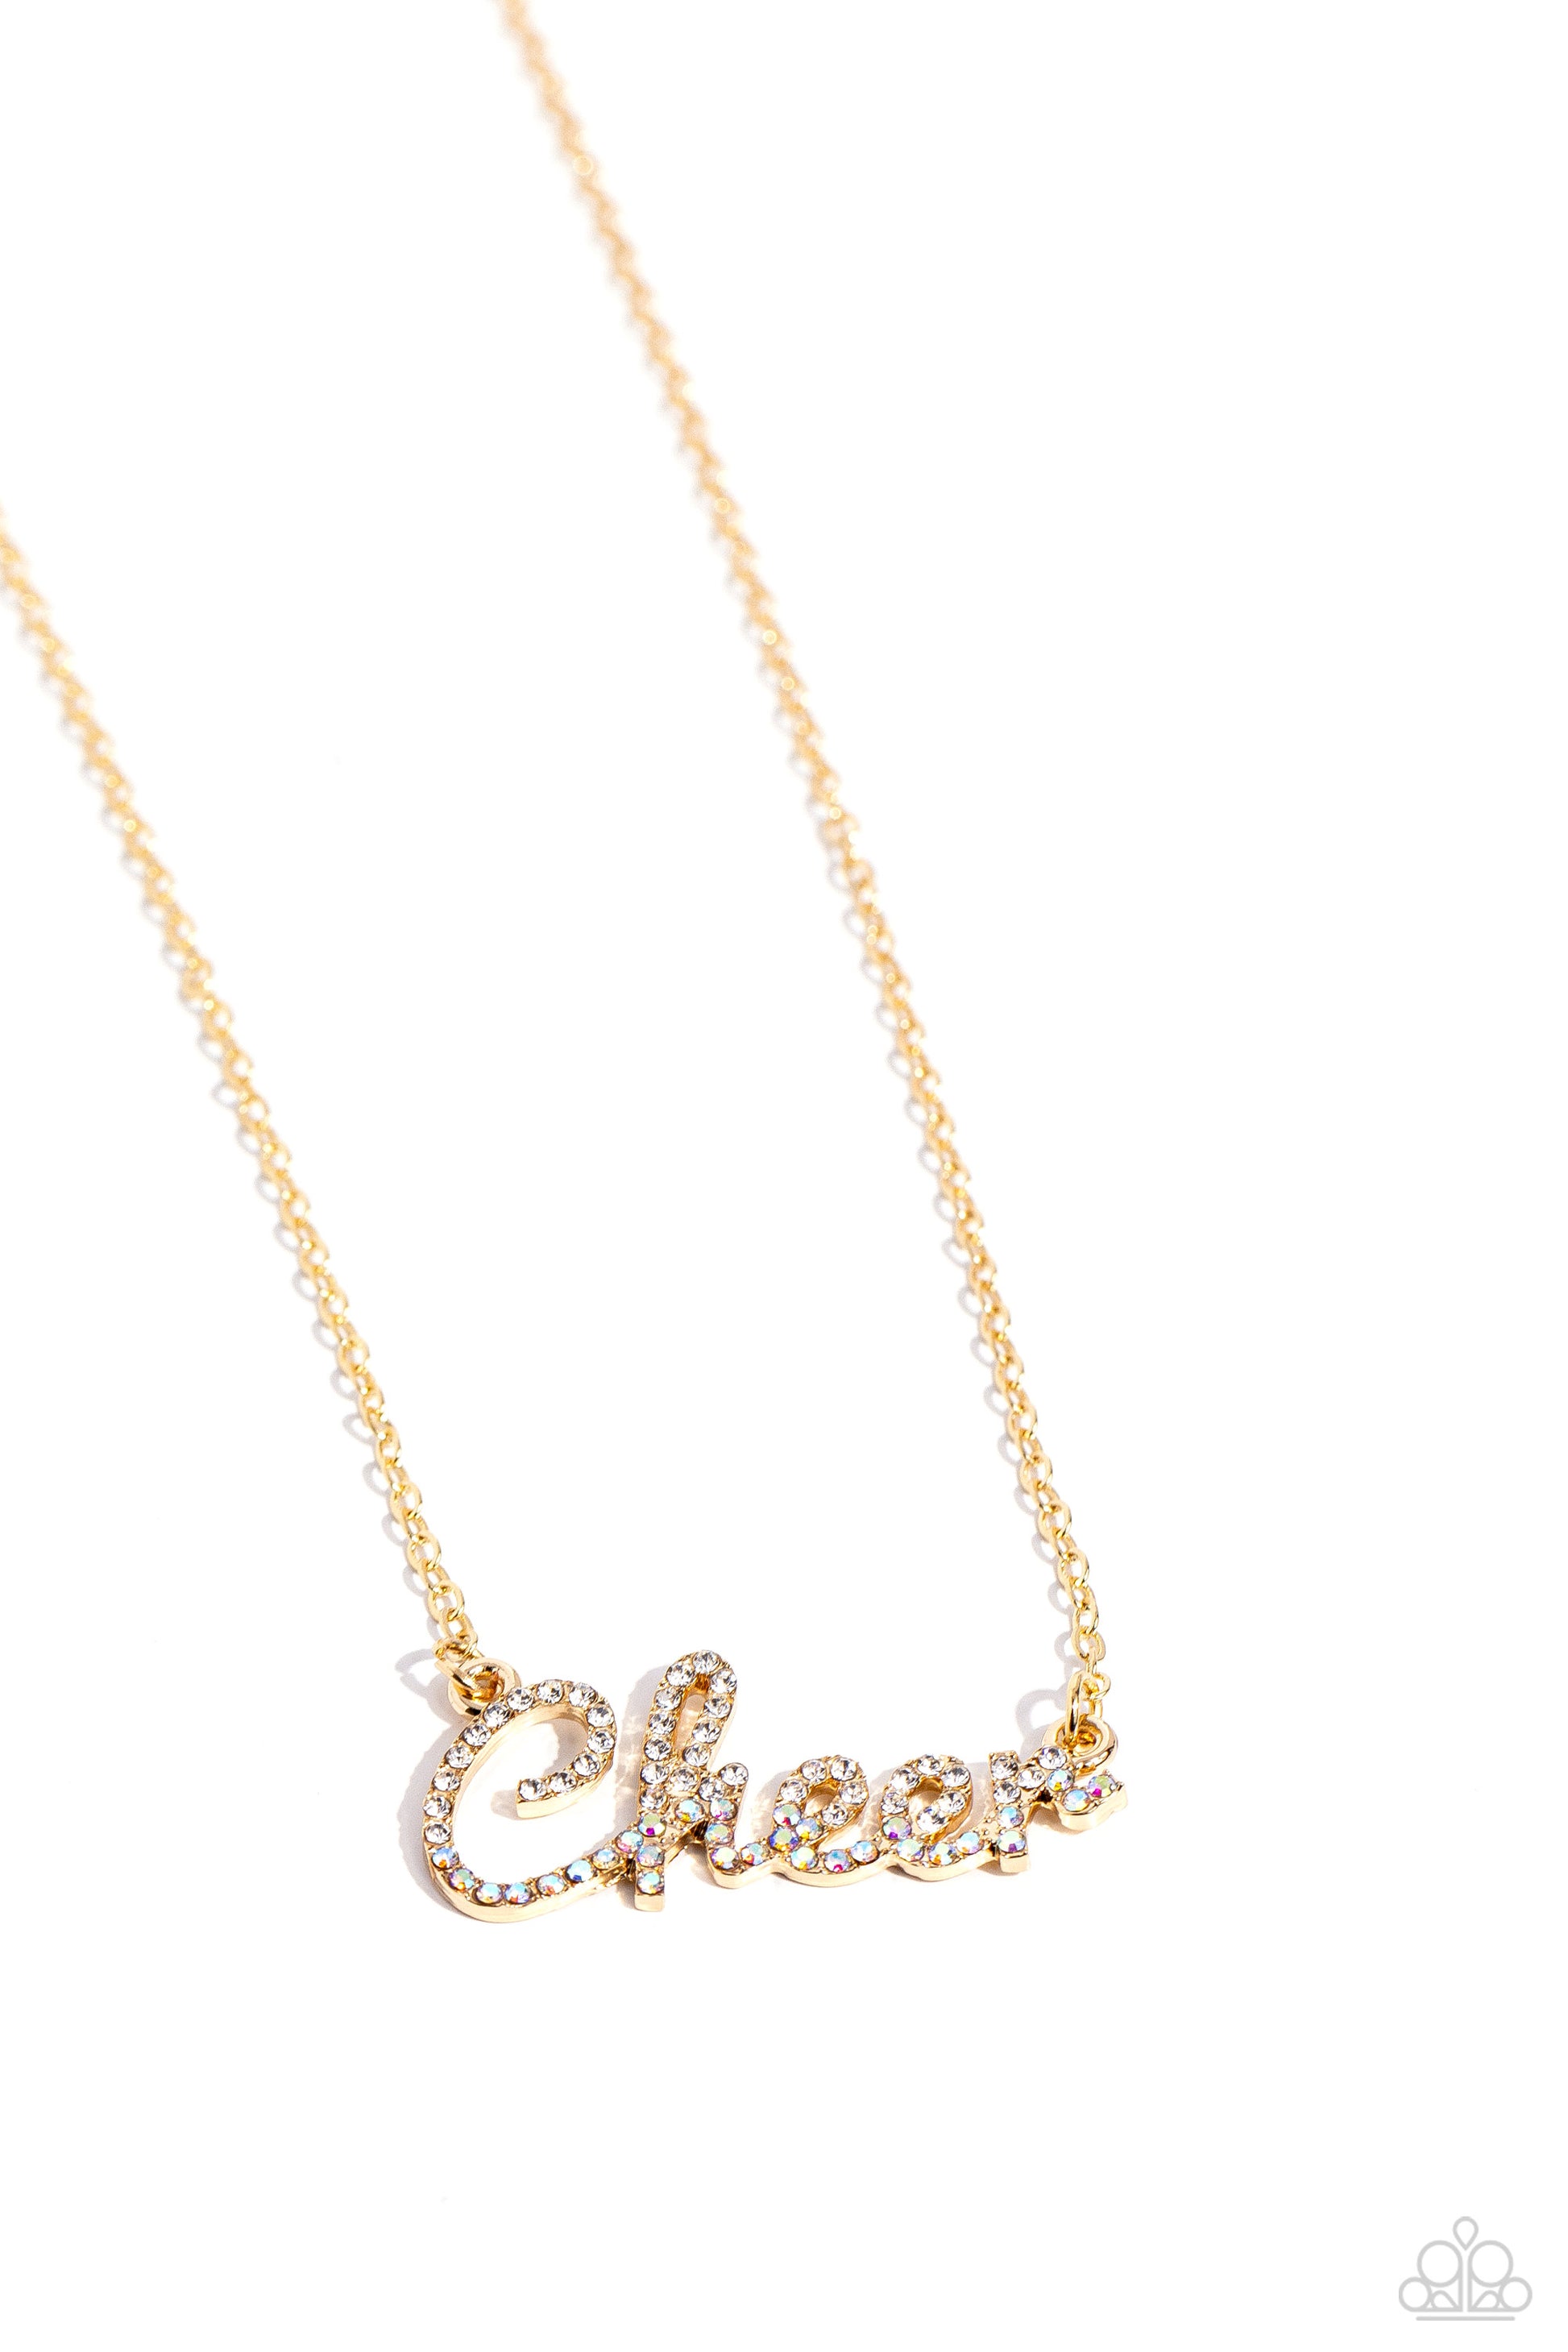 Cheer Squad Gold Necklace - Paparazzi Accessories  Curled in a script font, glistening gold letters spell out the word "Cheer" along a dainty gold chain. Embossed on the letters, dainty white rhinestones and iridescent rhinestones create a subtle ombré effect for a peppy finish. Features an adjustable clasp closure. Due to its prismatic palette, color may vary.  Sold as one individual necklace. Includes one pair of matching earrings.  P2WD-GDXX-332XX